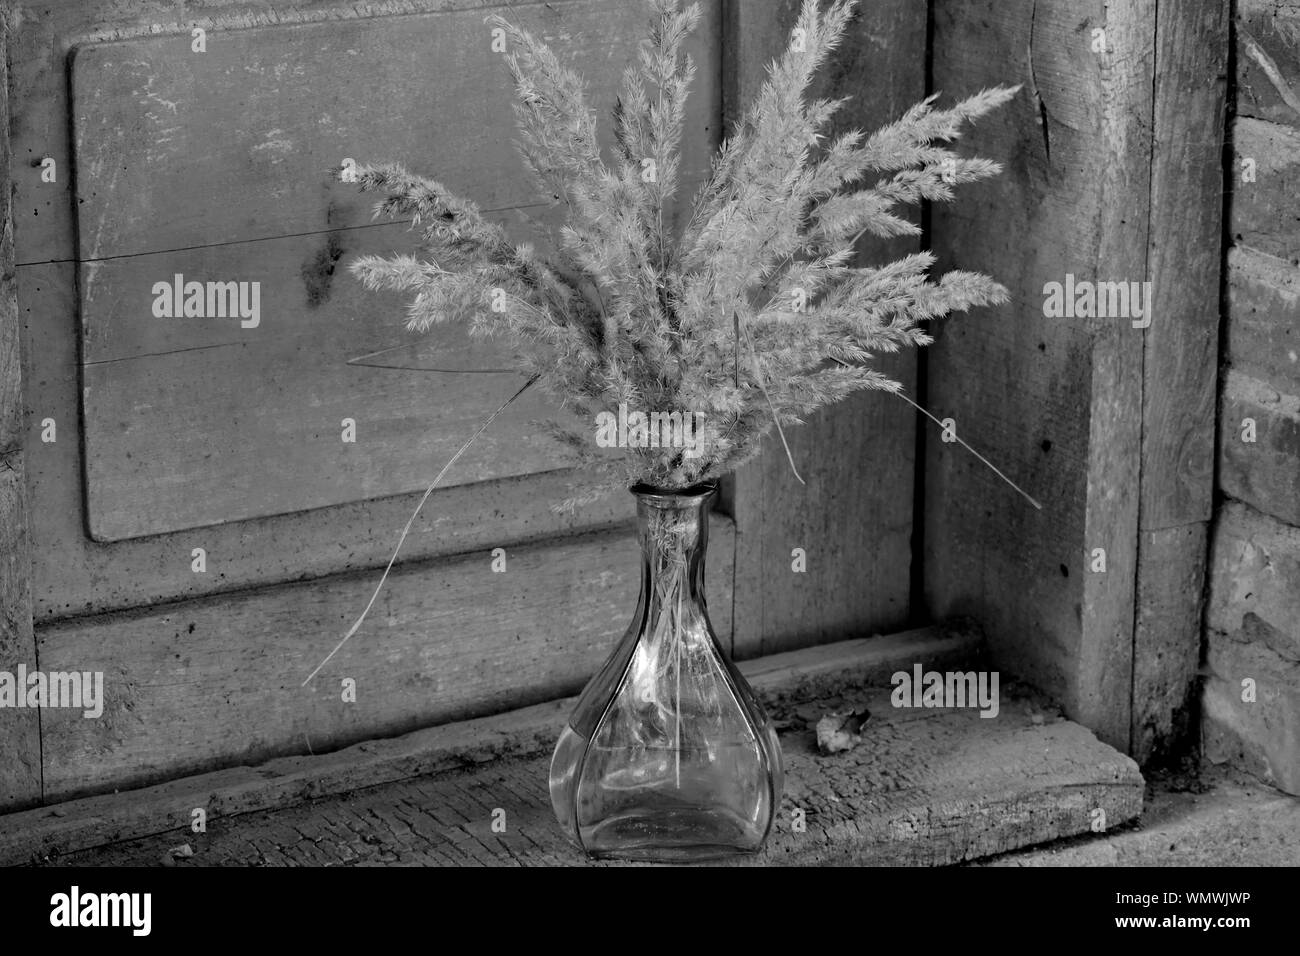 Bouquet of fluffy autumn spikelets of grass in a glass vase Stock Photo